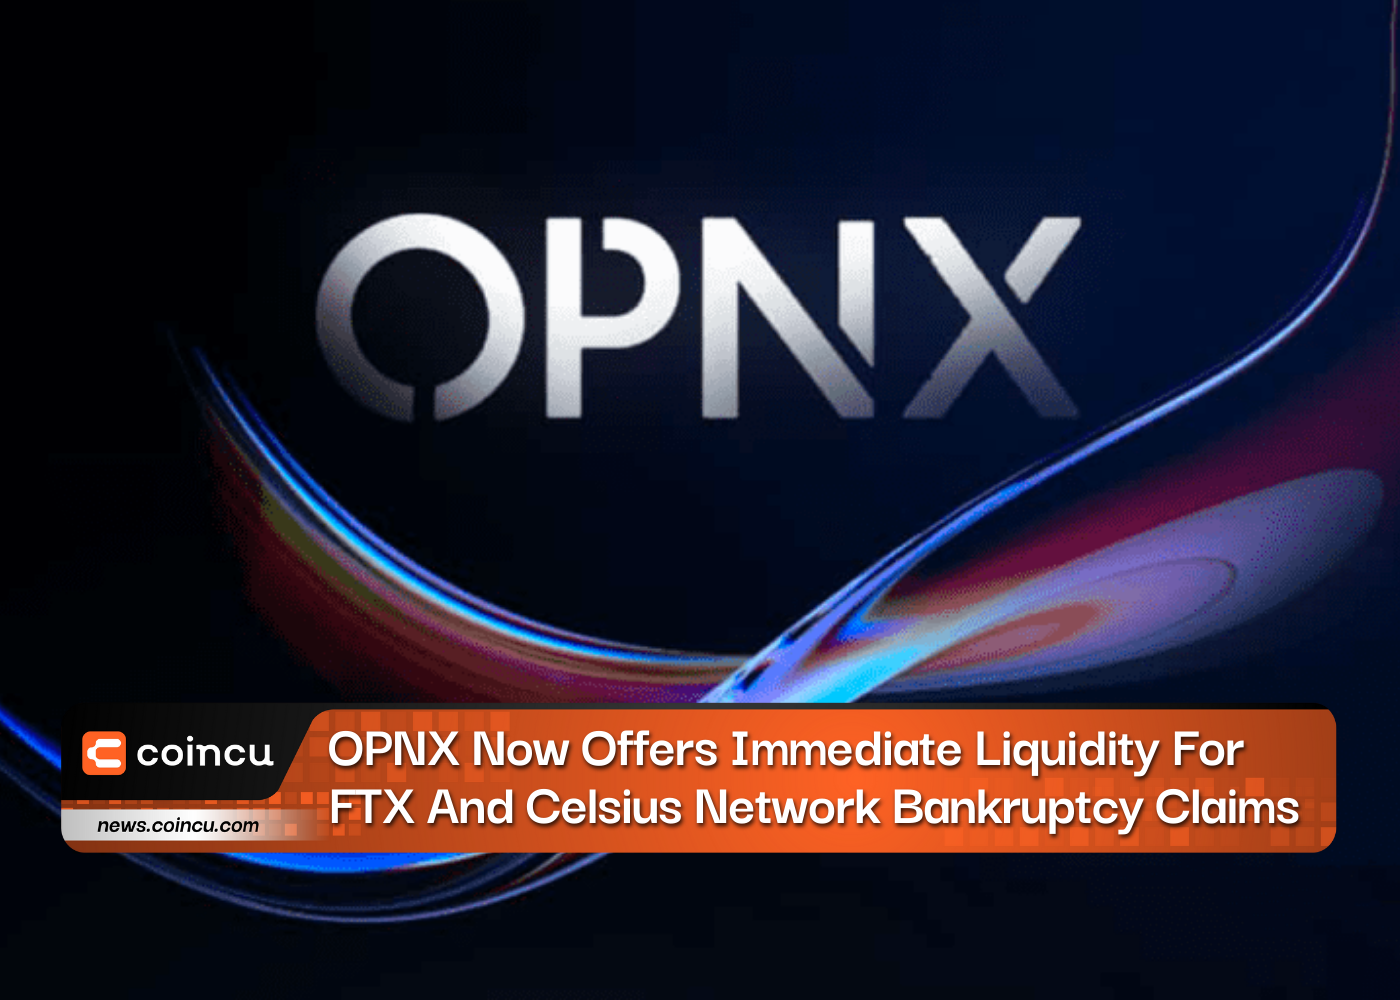 OPNX Now Offers Immediate Liquidity for FTX and Celsius Network Bankruptcy Claims